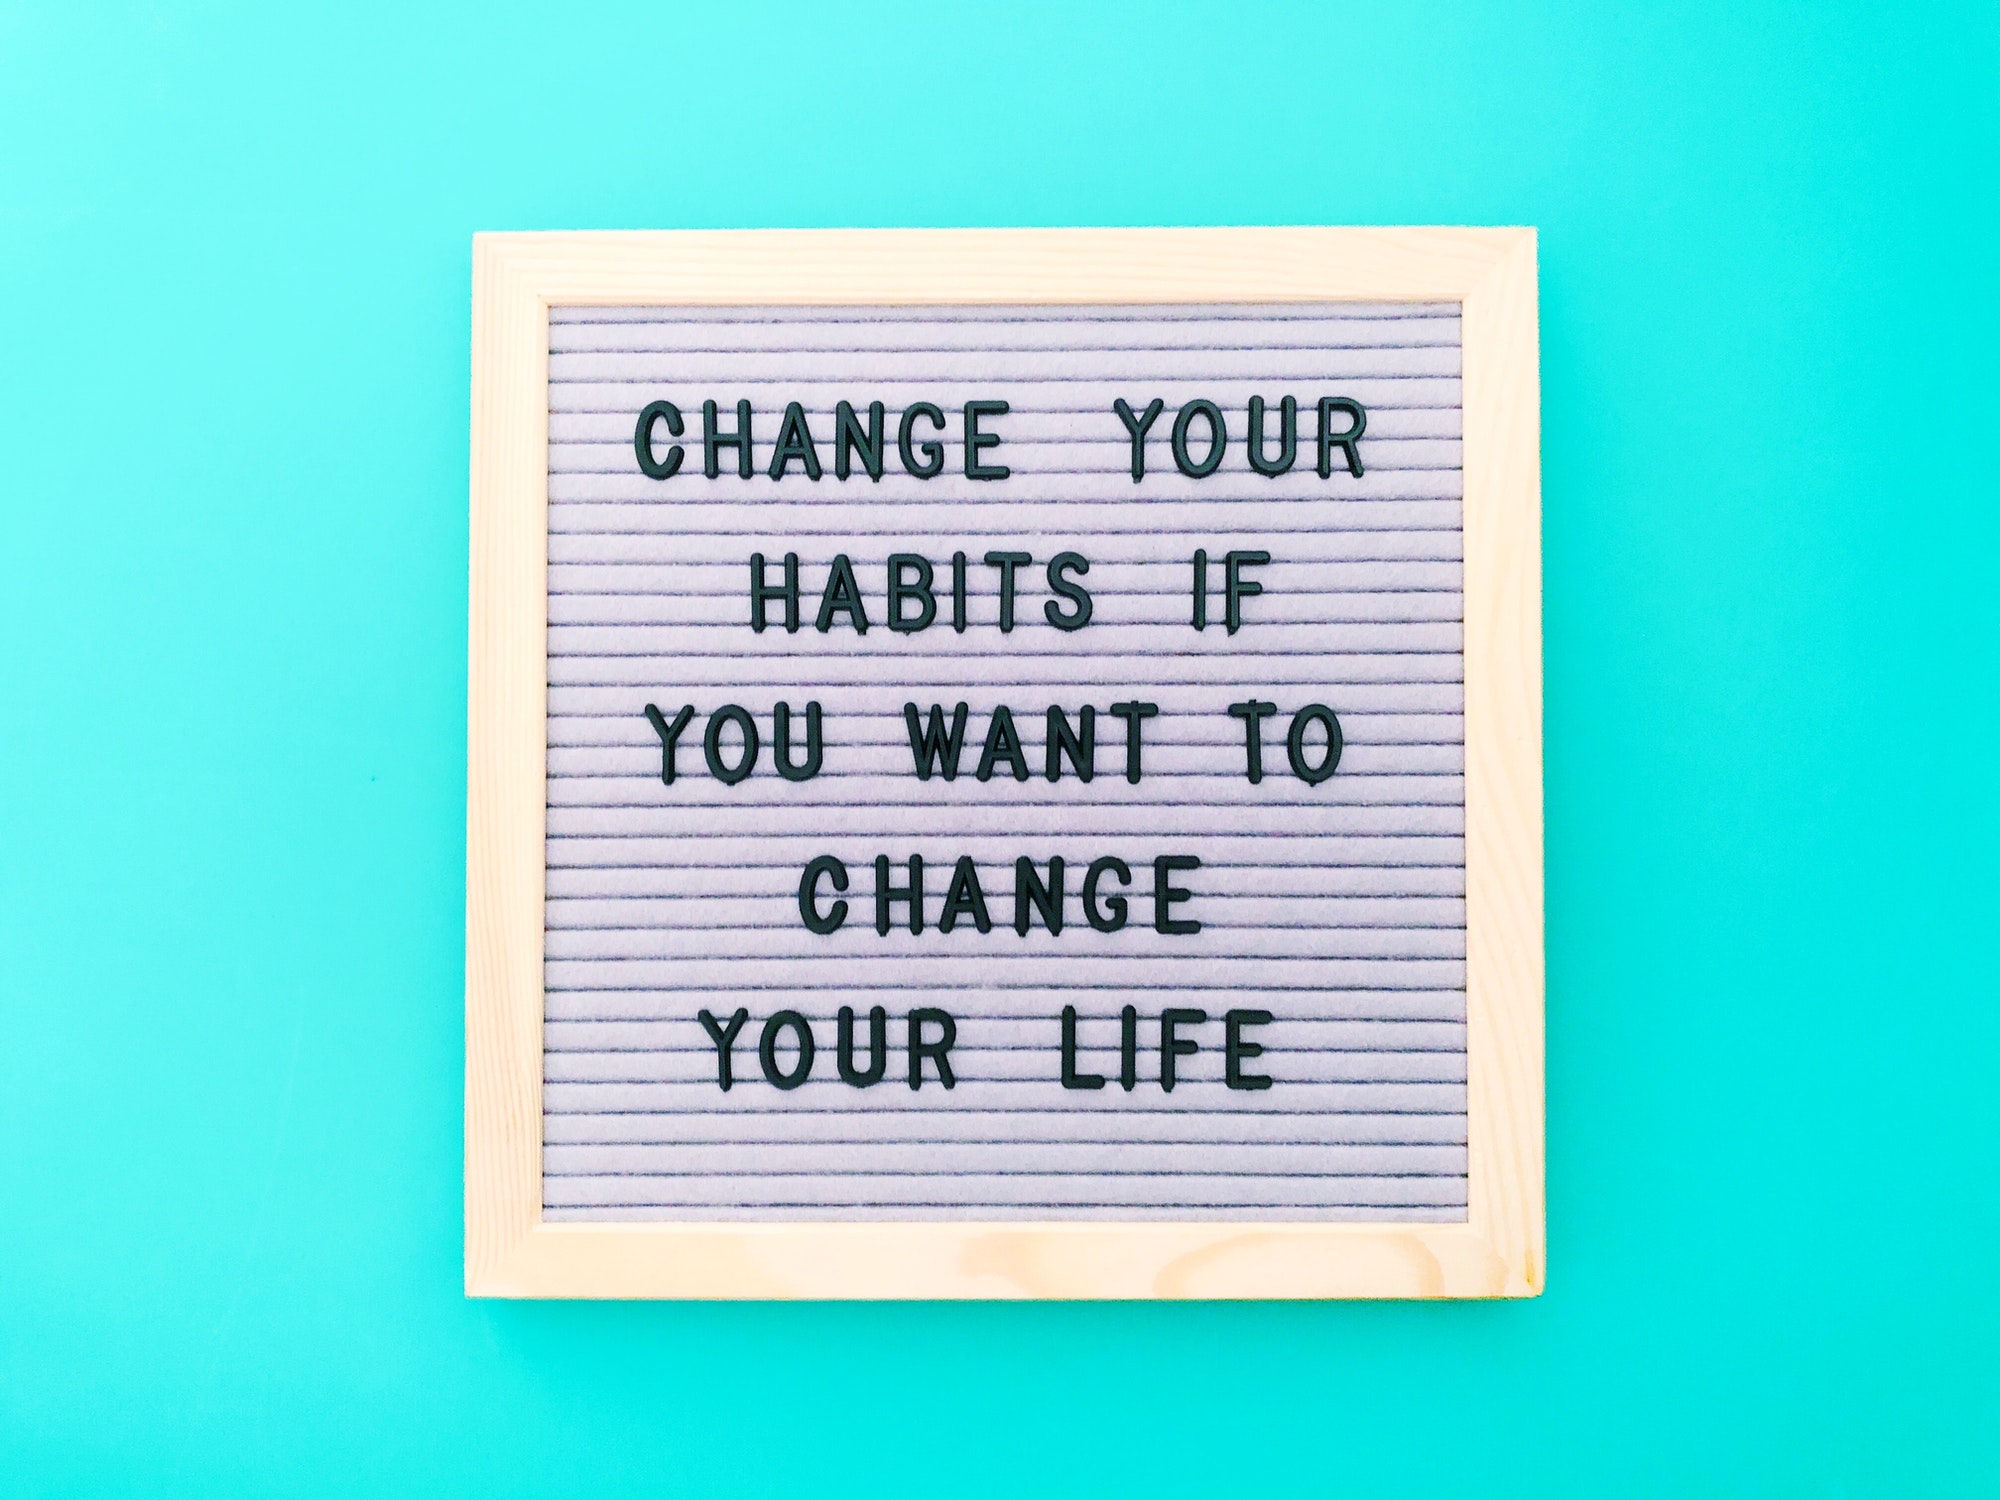 Change your habits if you want to change your life.